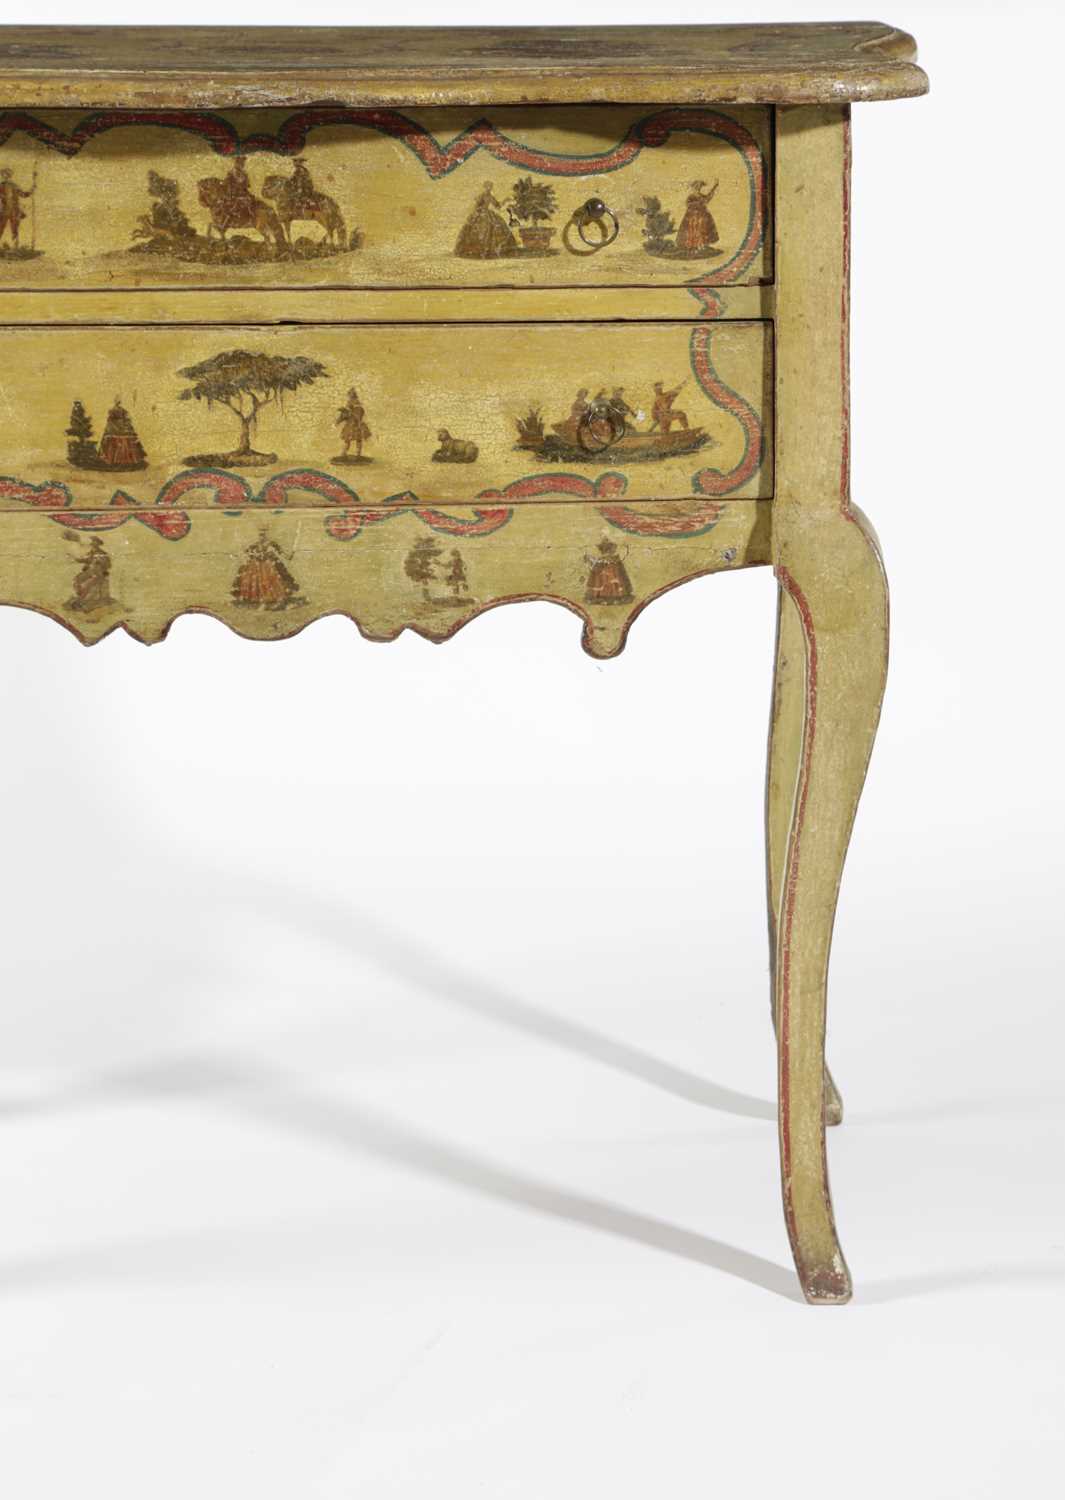 AN ITALIAN PAINTED AND LACCA POVERA SERPENTINE SIDE TABLE 18TH CENTURY parcel gilt and decorated - Image 3 of 3